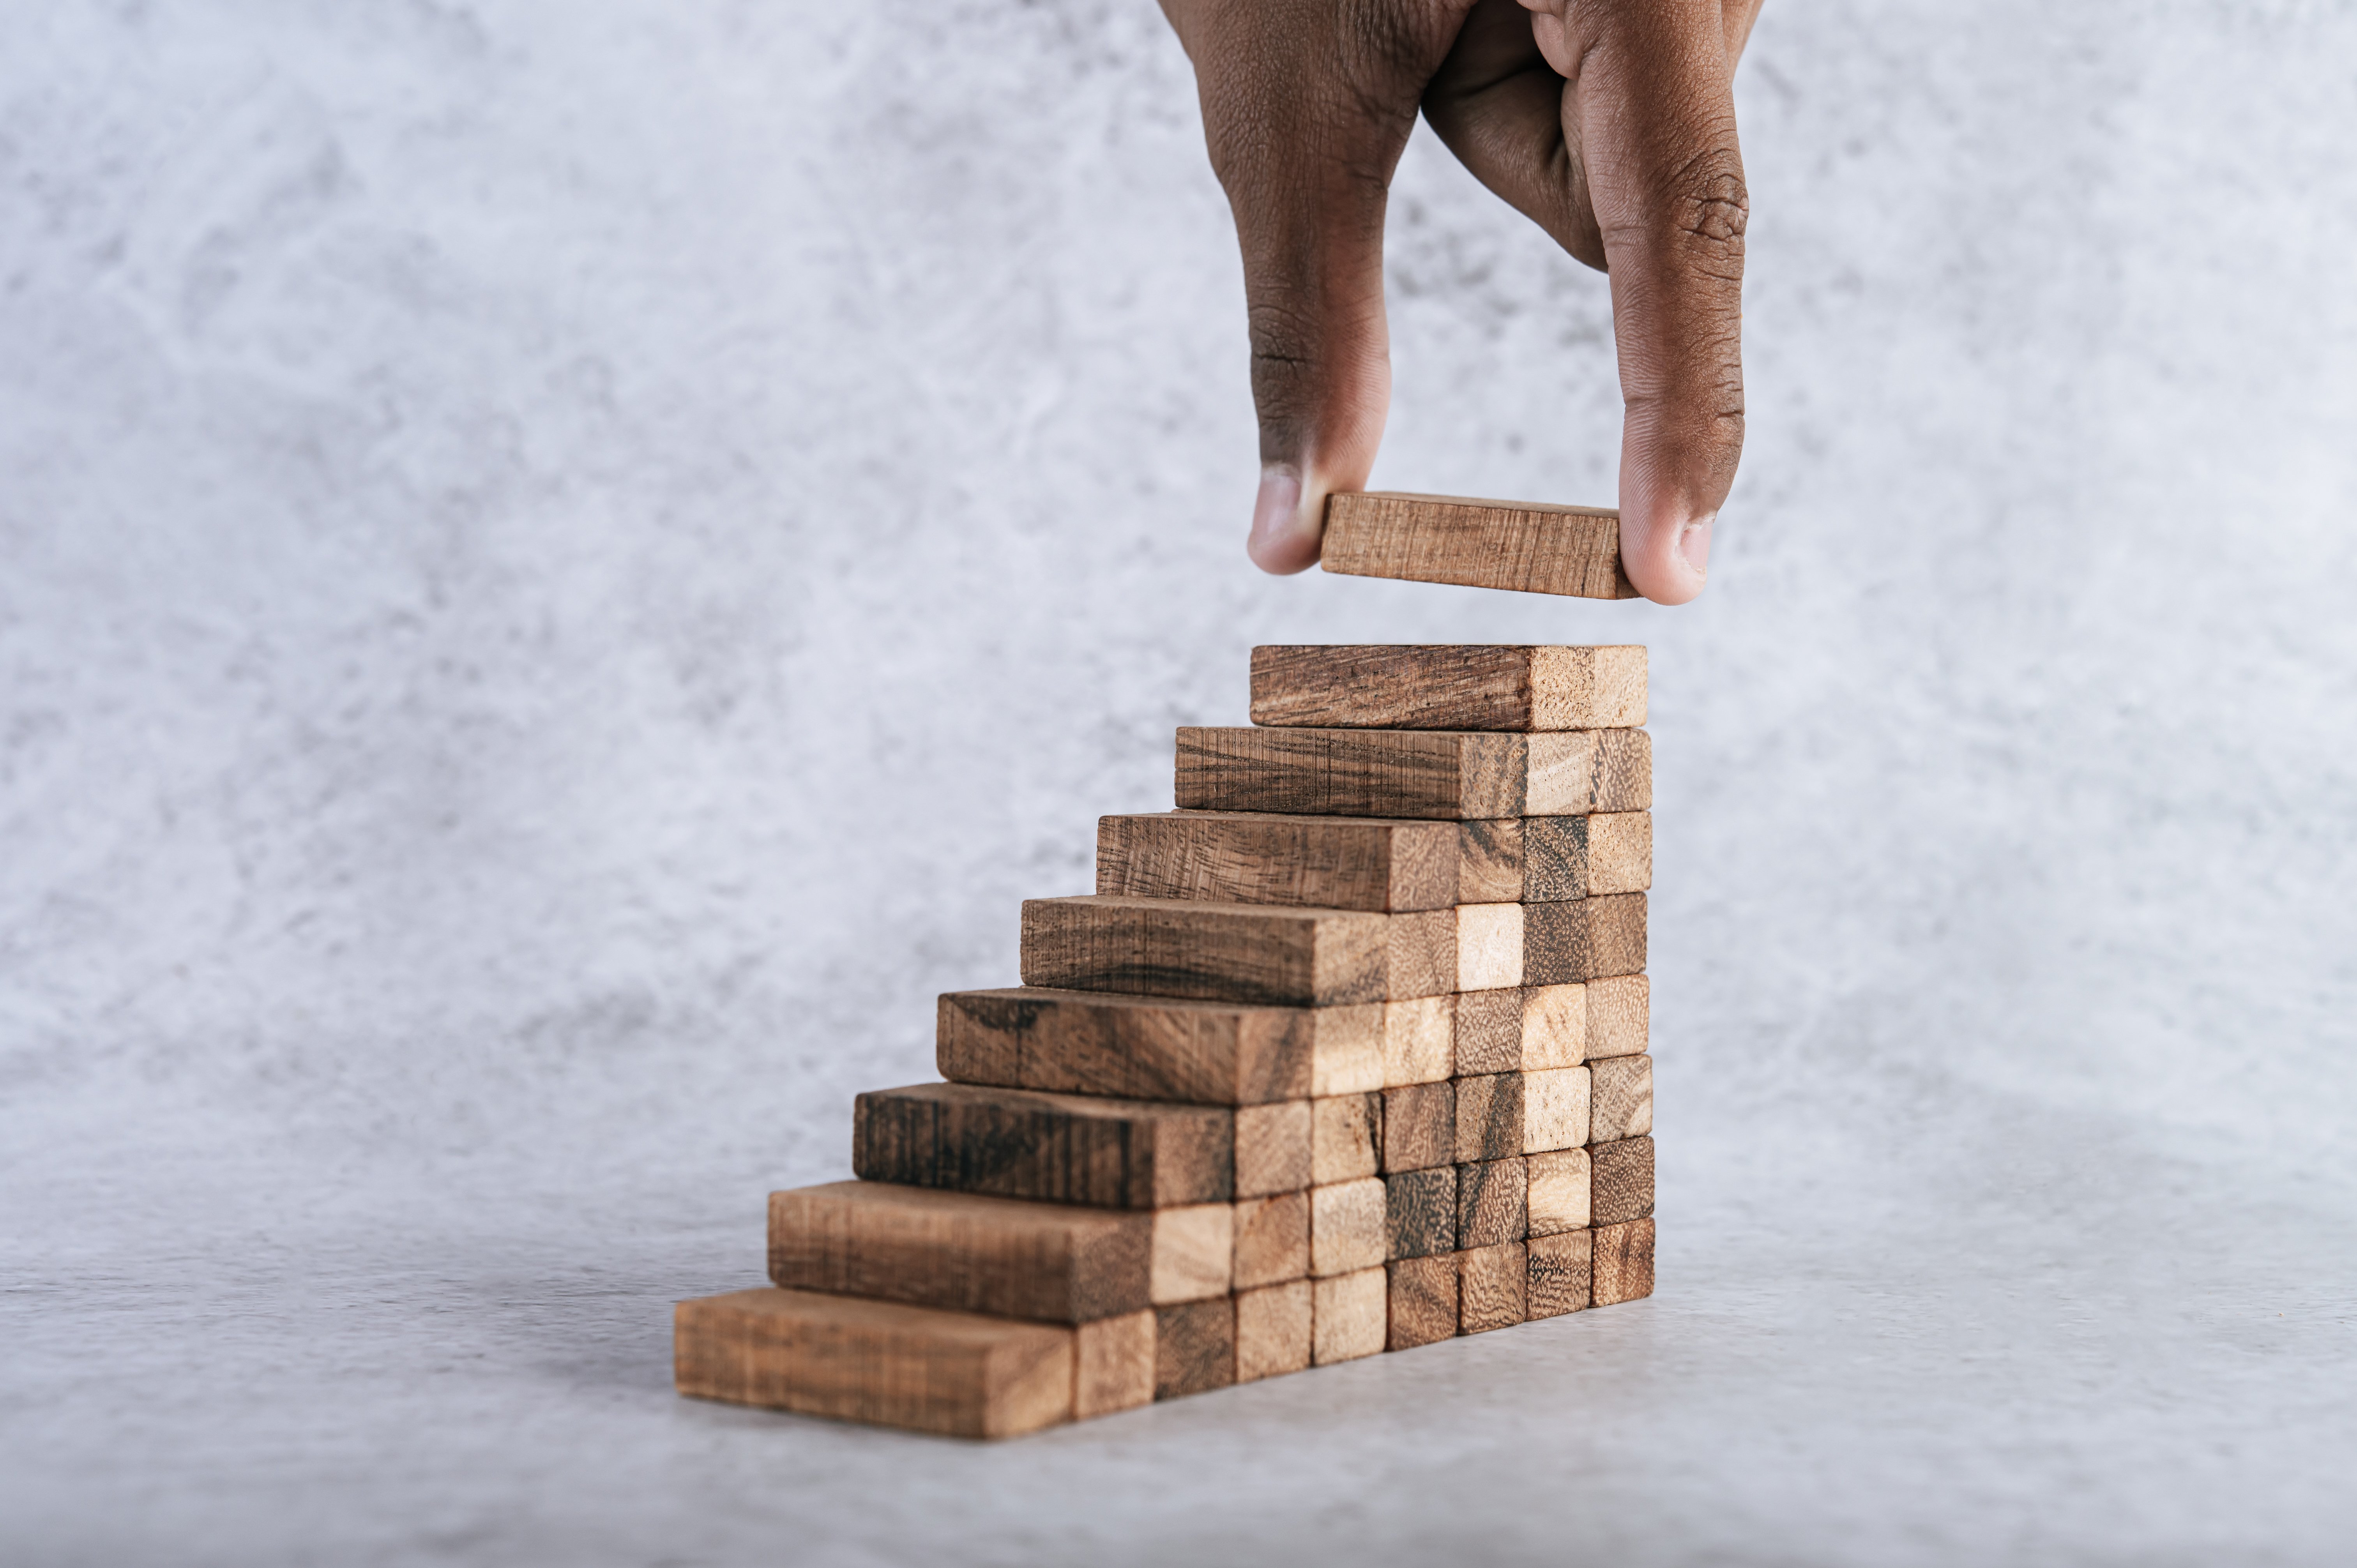 stacking-wooden-blocks-is-risk-creating-business-growth-ideas (1)